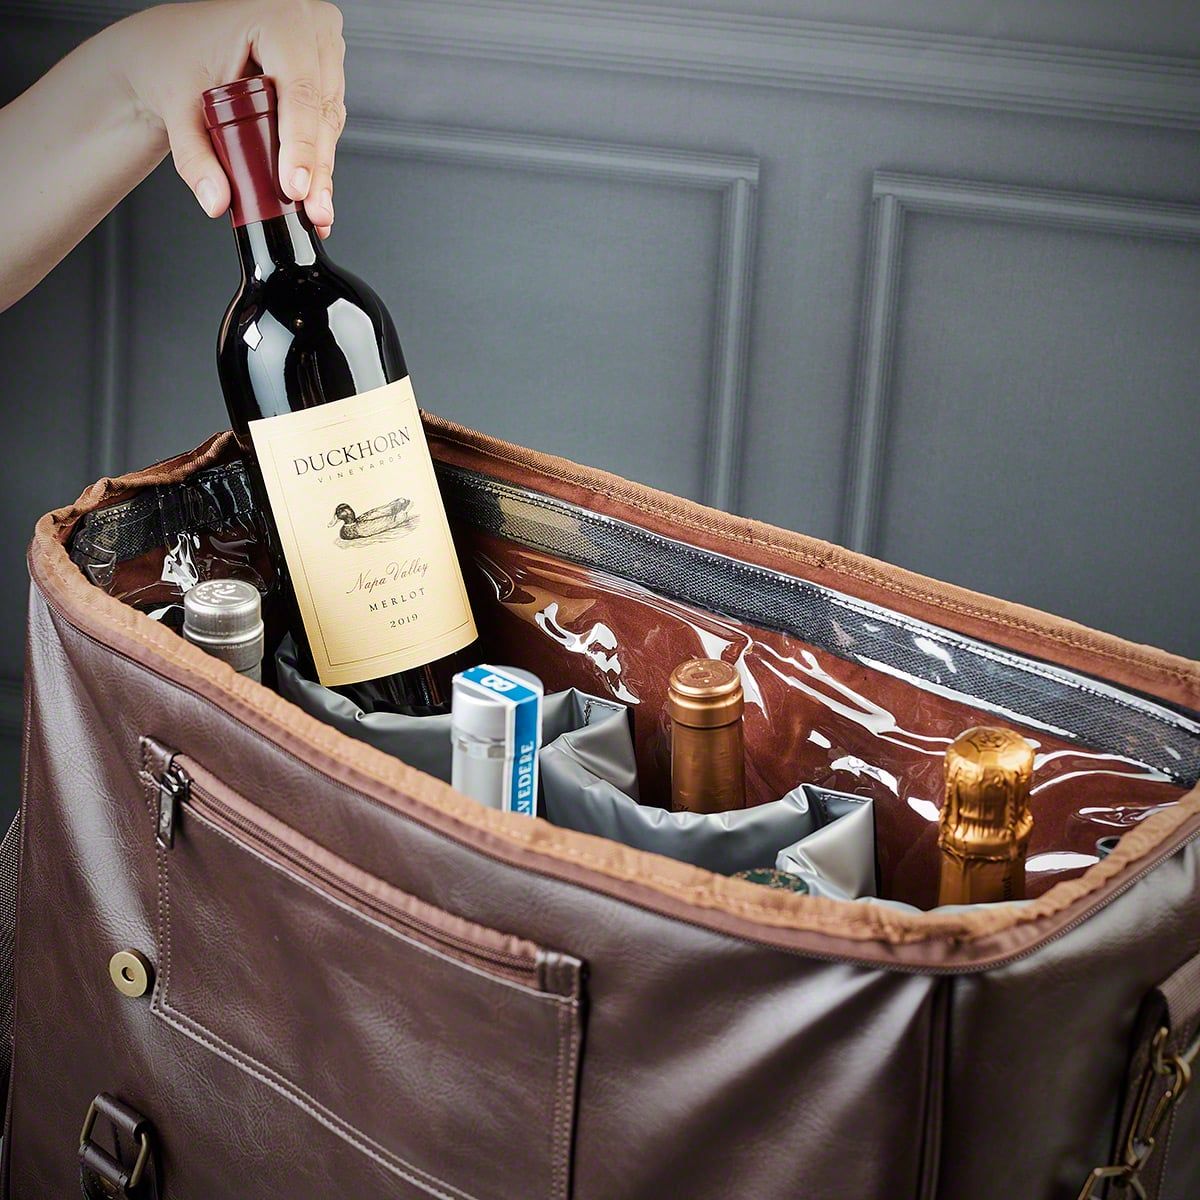 https://images.homewetbar.com/media/catalog/product/w/e/weekender-bag-6-bottle-travel-wine-carrier-insulated-wine-bag-out-10886.jpg?store=default&image-type=image